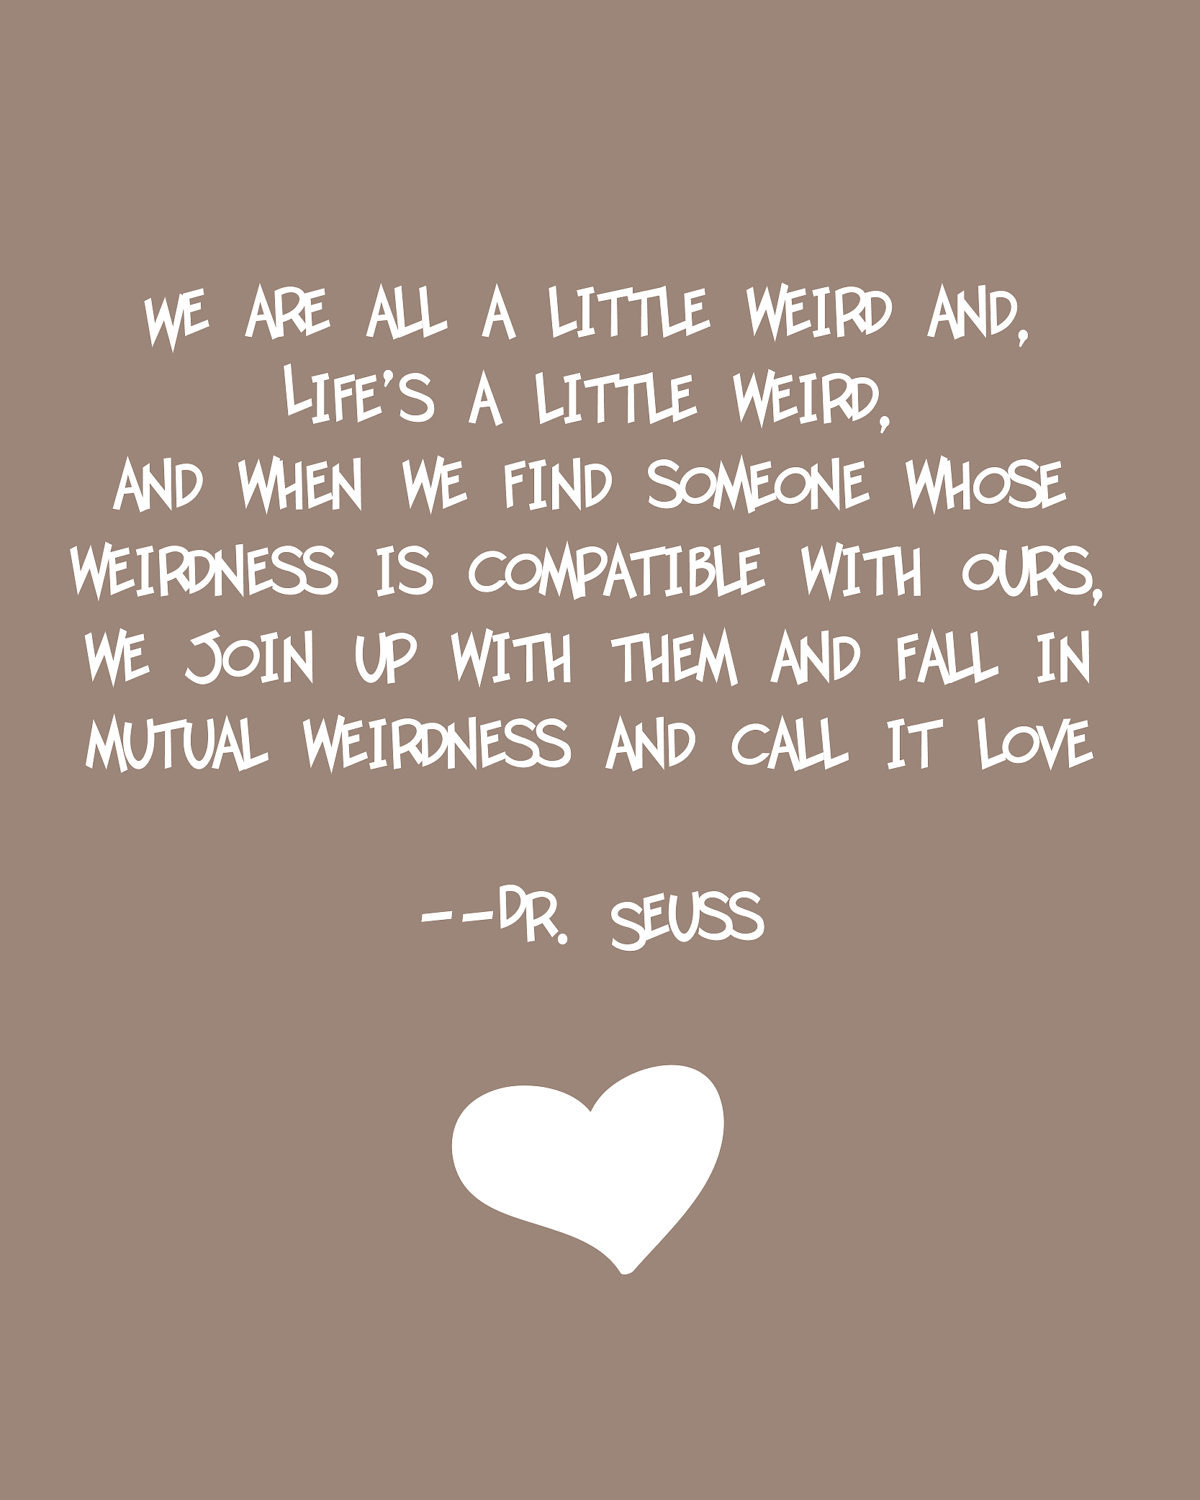 Dr Suess Love Quote
 Dr Seuss Weird Love Quote Brown by ajsterrett on Etsy